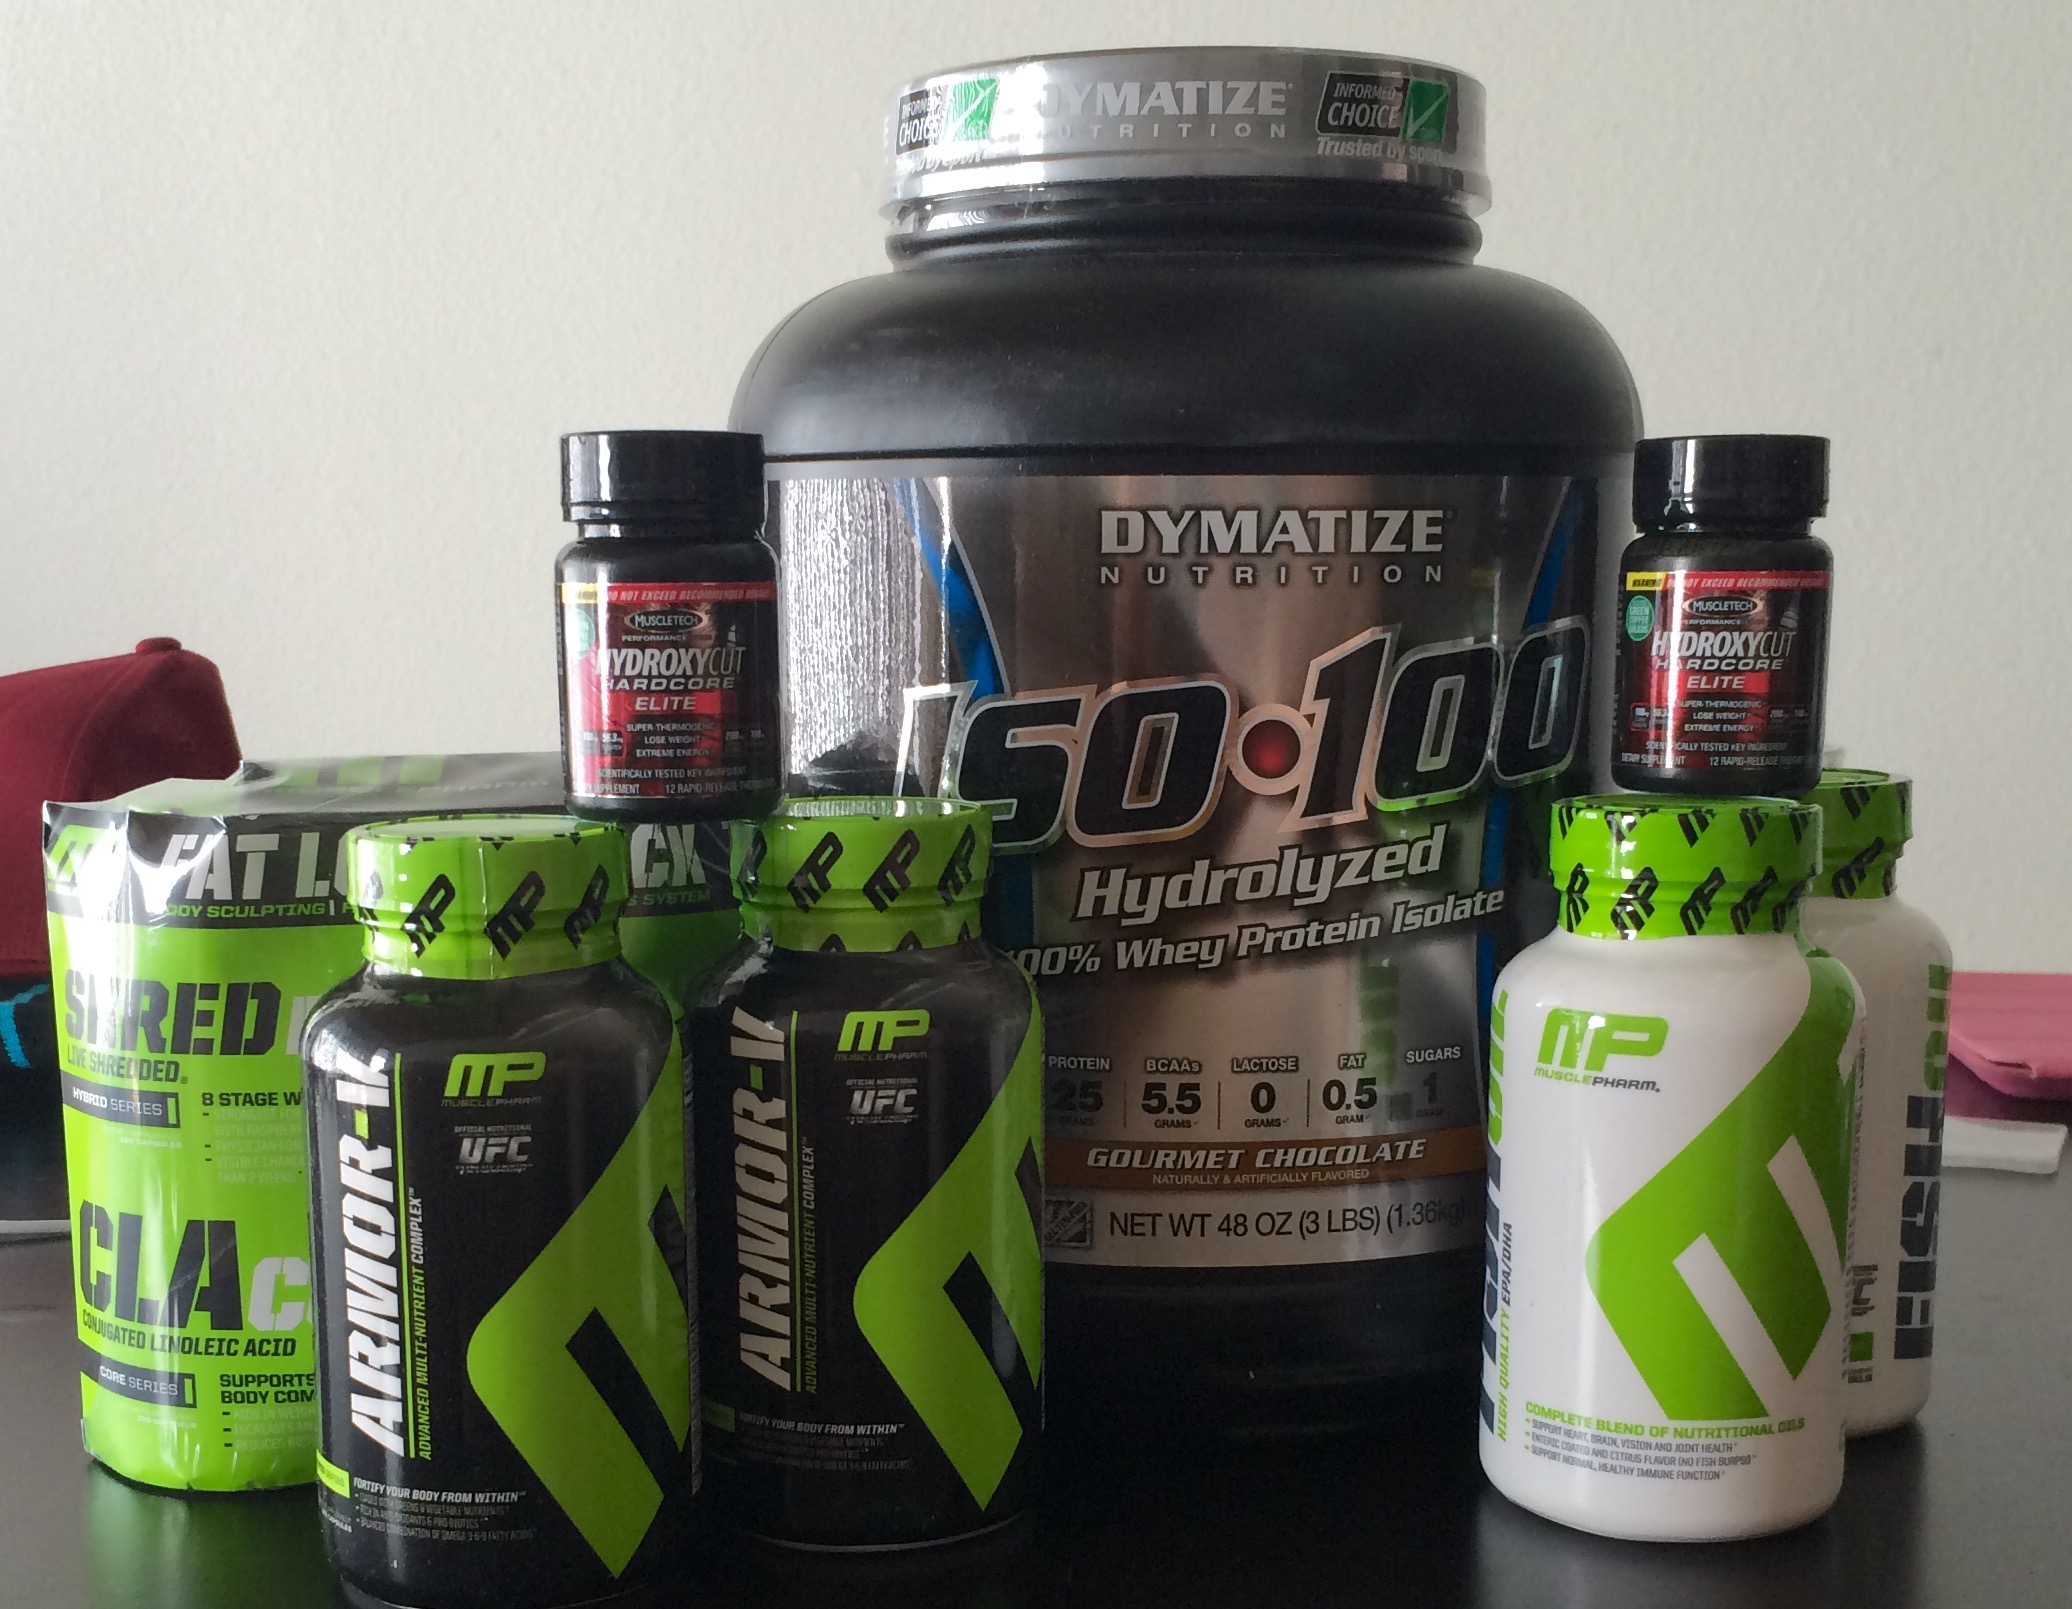 alafitness supplements whey protein Hollywood personal trainer Dymatize MusclePharm fat burner